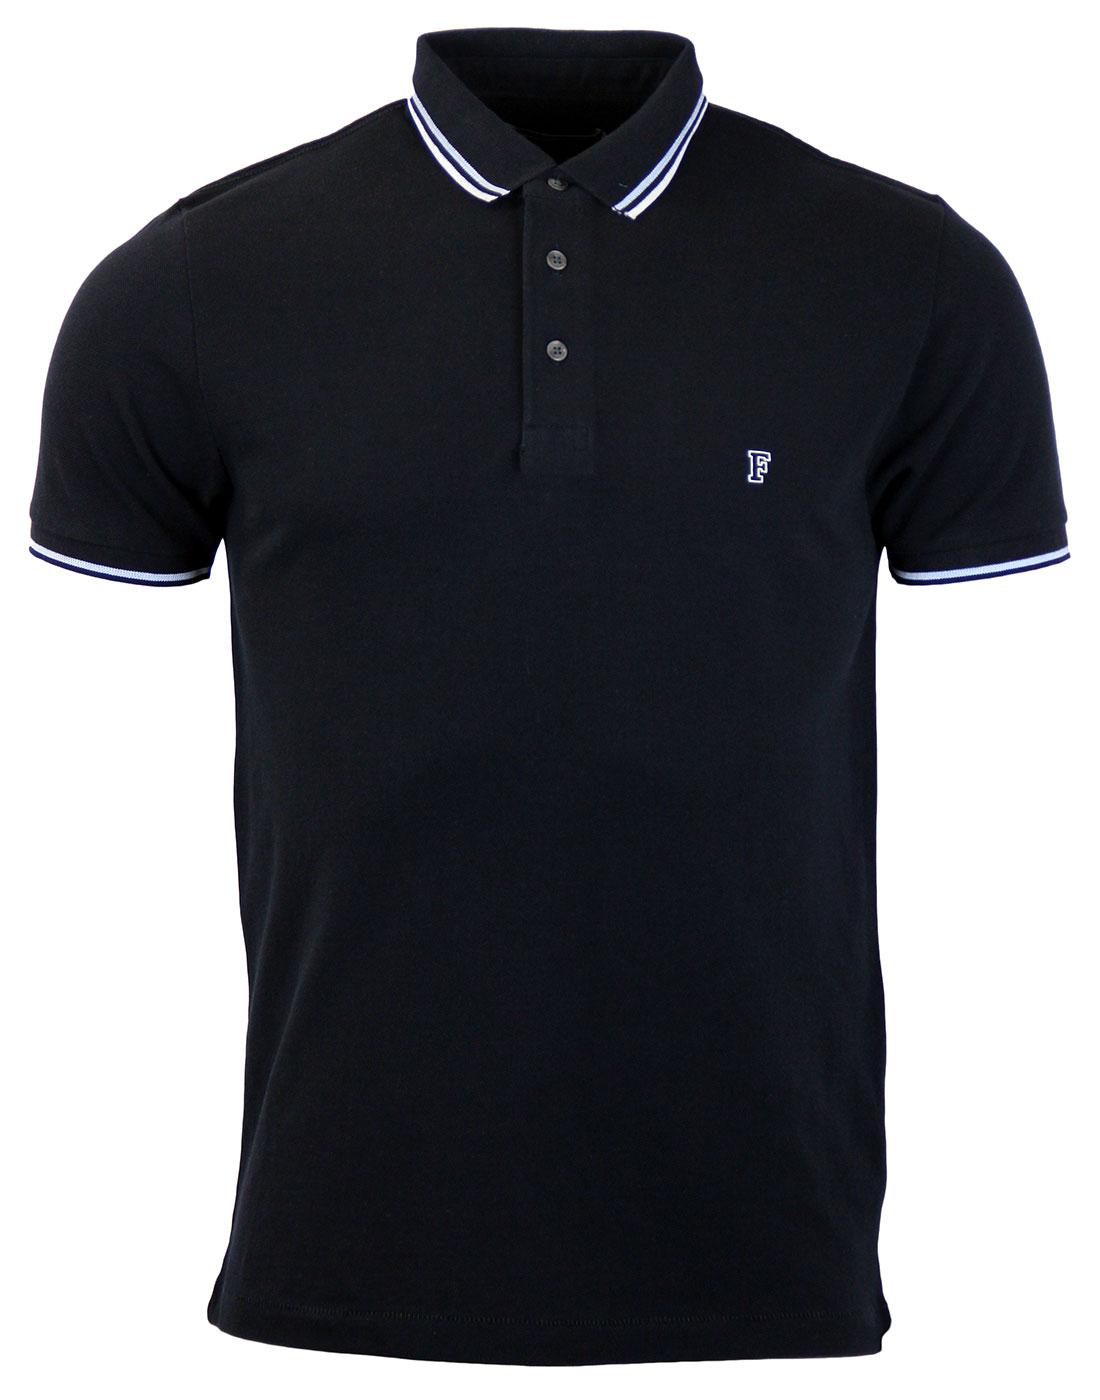 FRENCH CONNECTION Dean Retro Mod Tipped F Polo Shirt in Marine